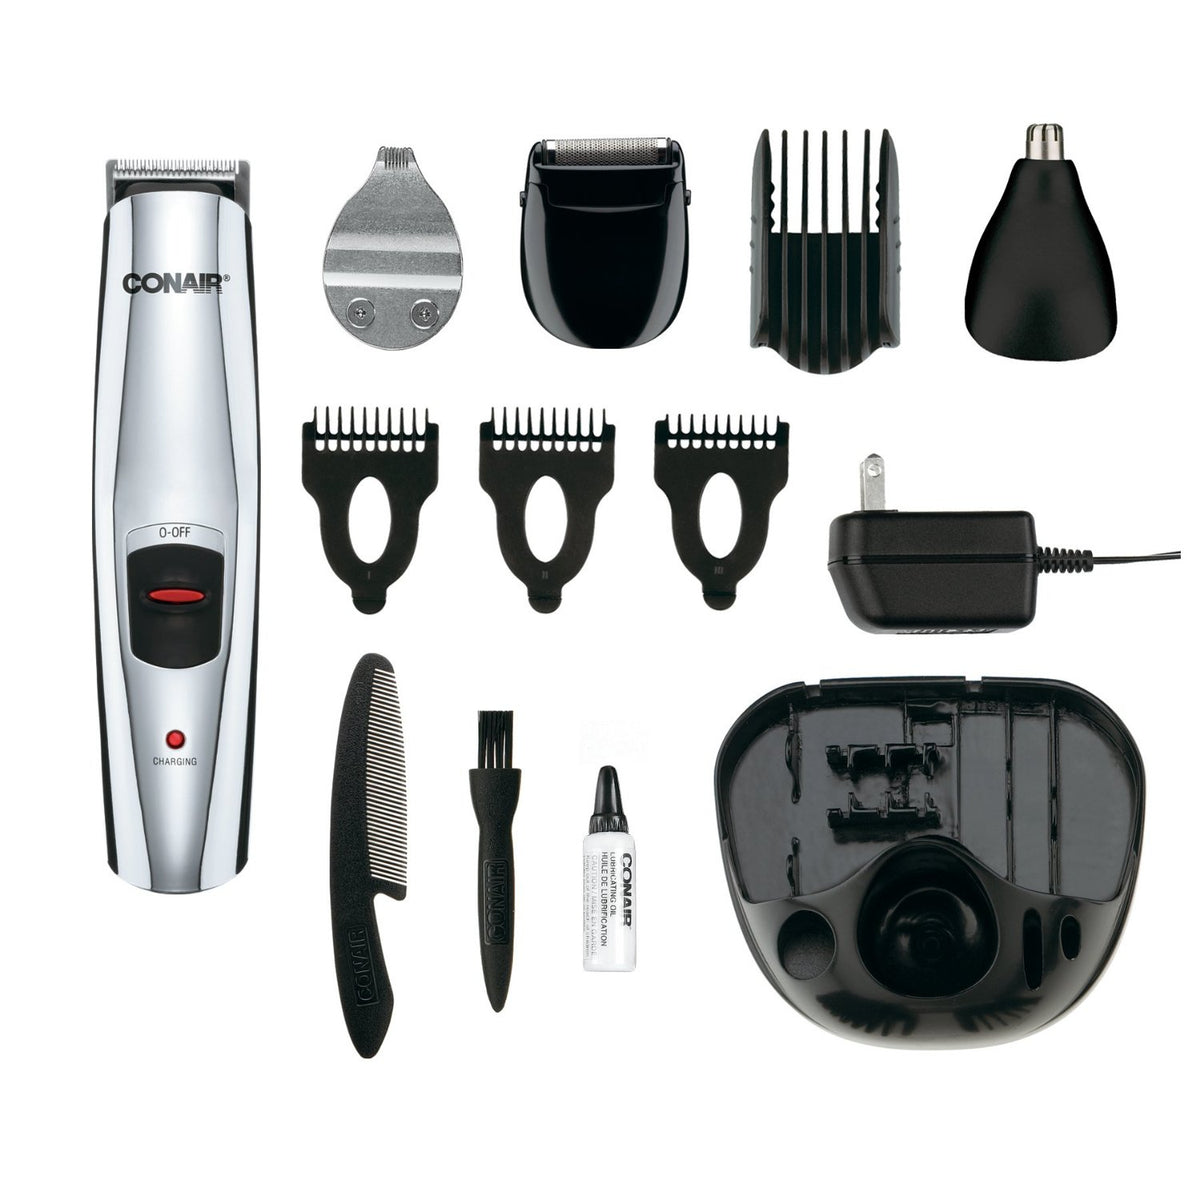 Conair GMT189CGB All-In-One Beard And Mustache Trimmer, 13 piece